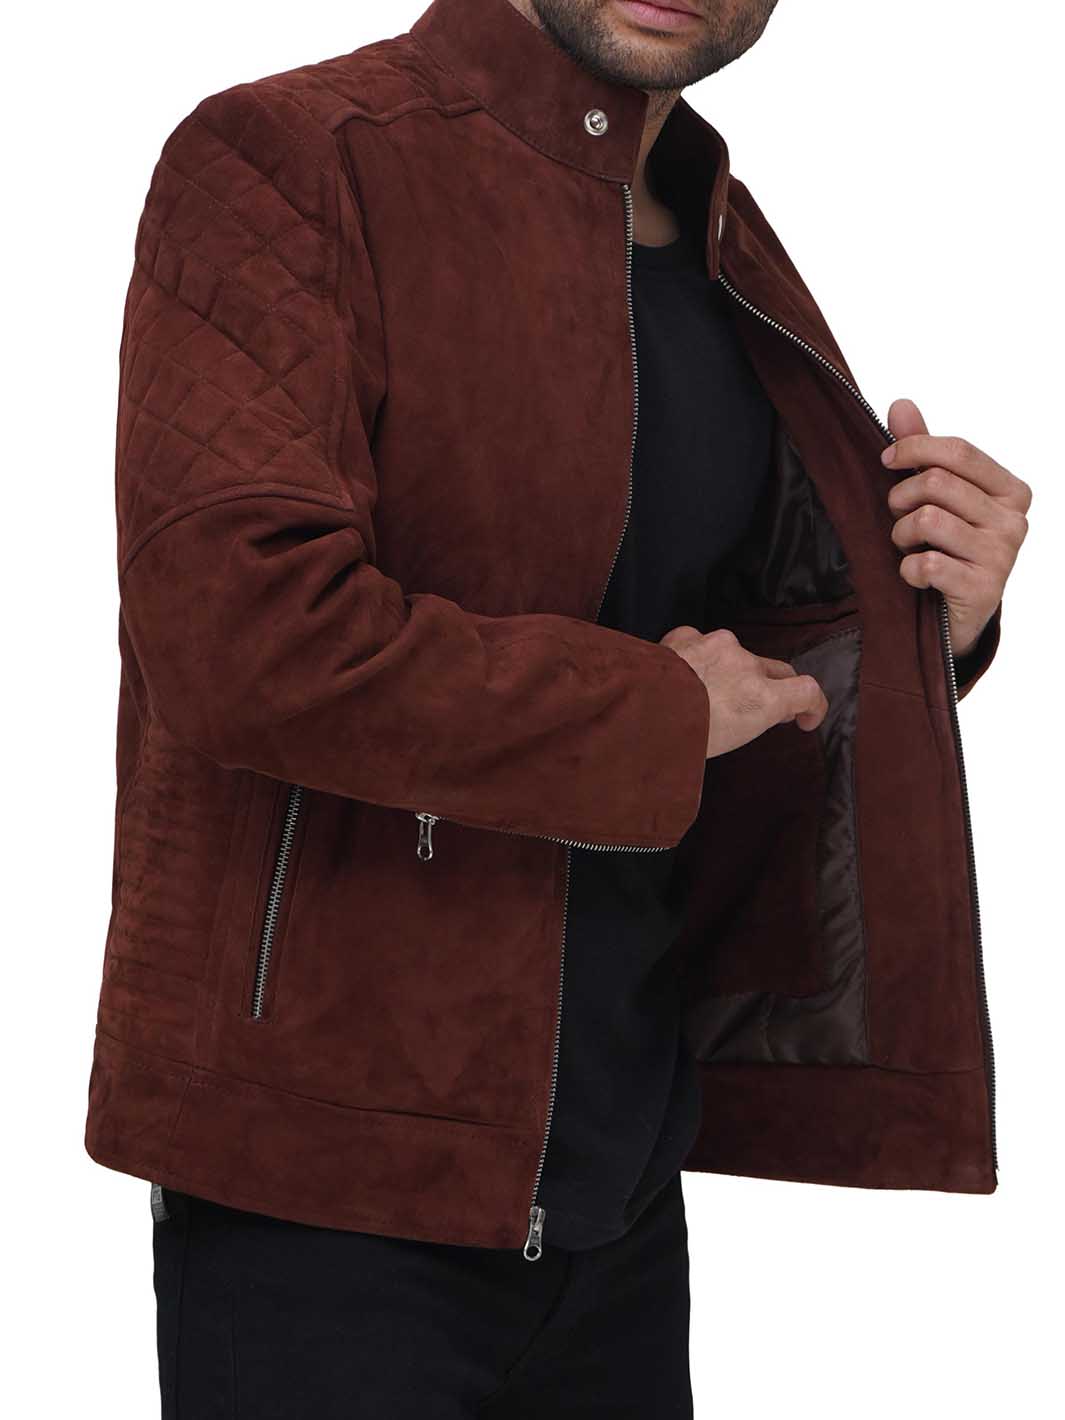 Mens Brown Suede Real leather Jacket